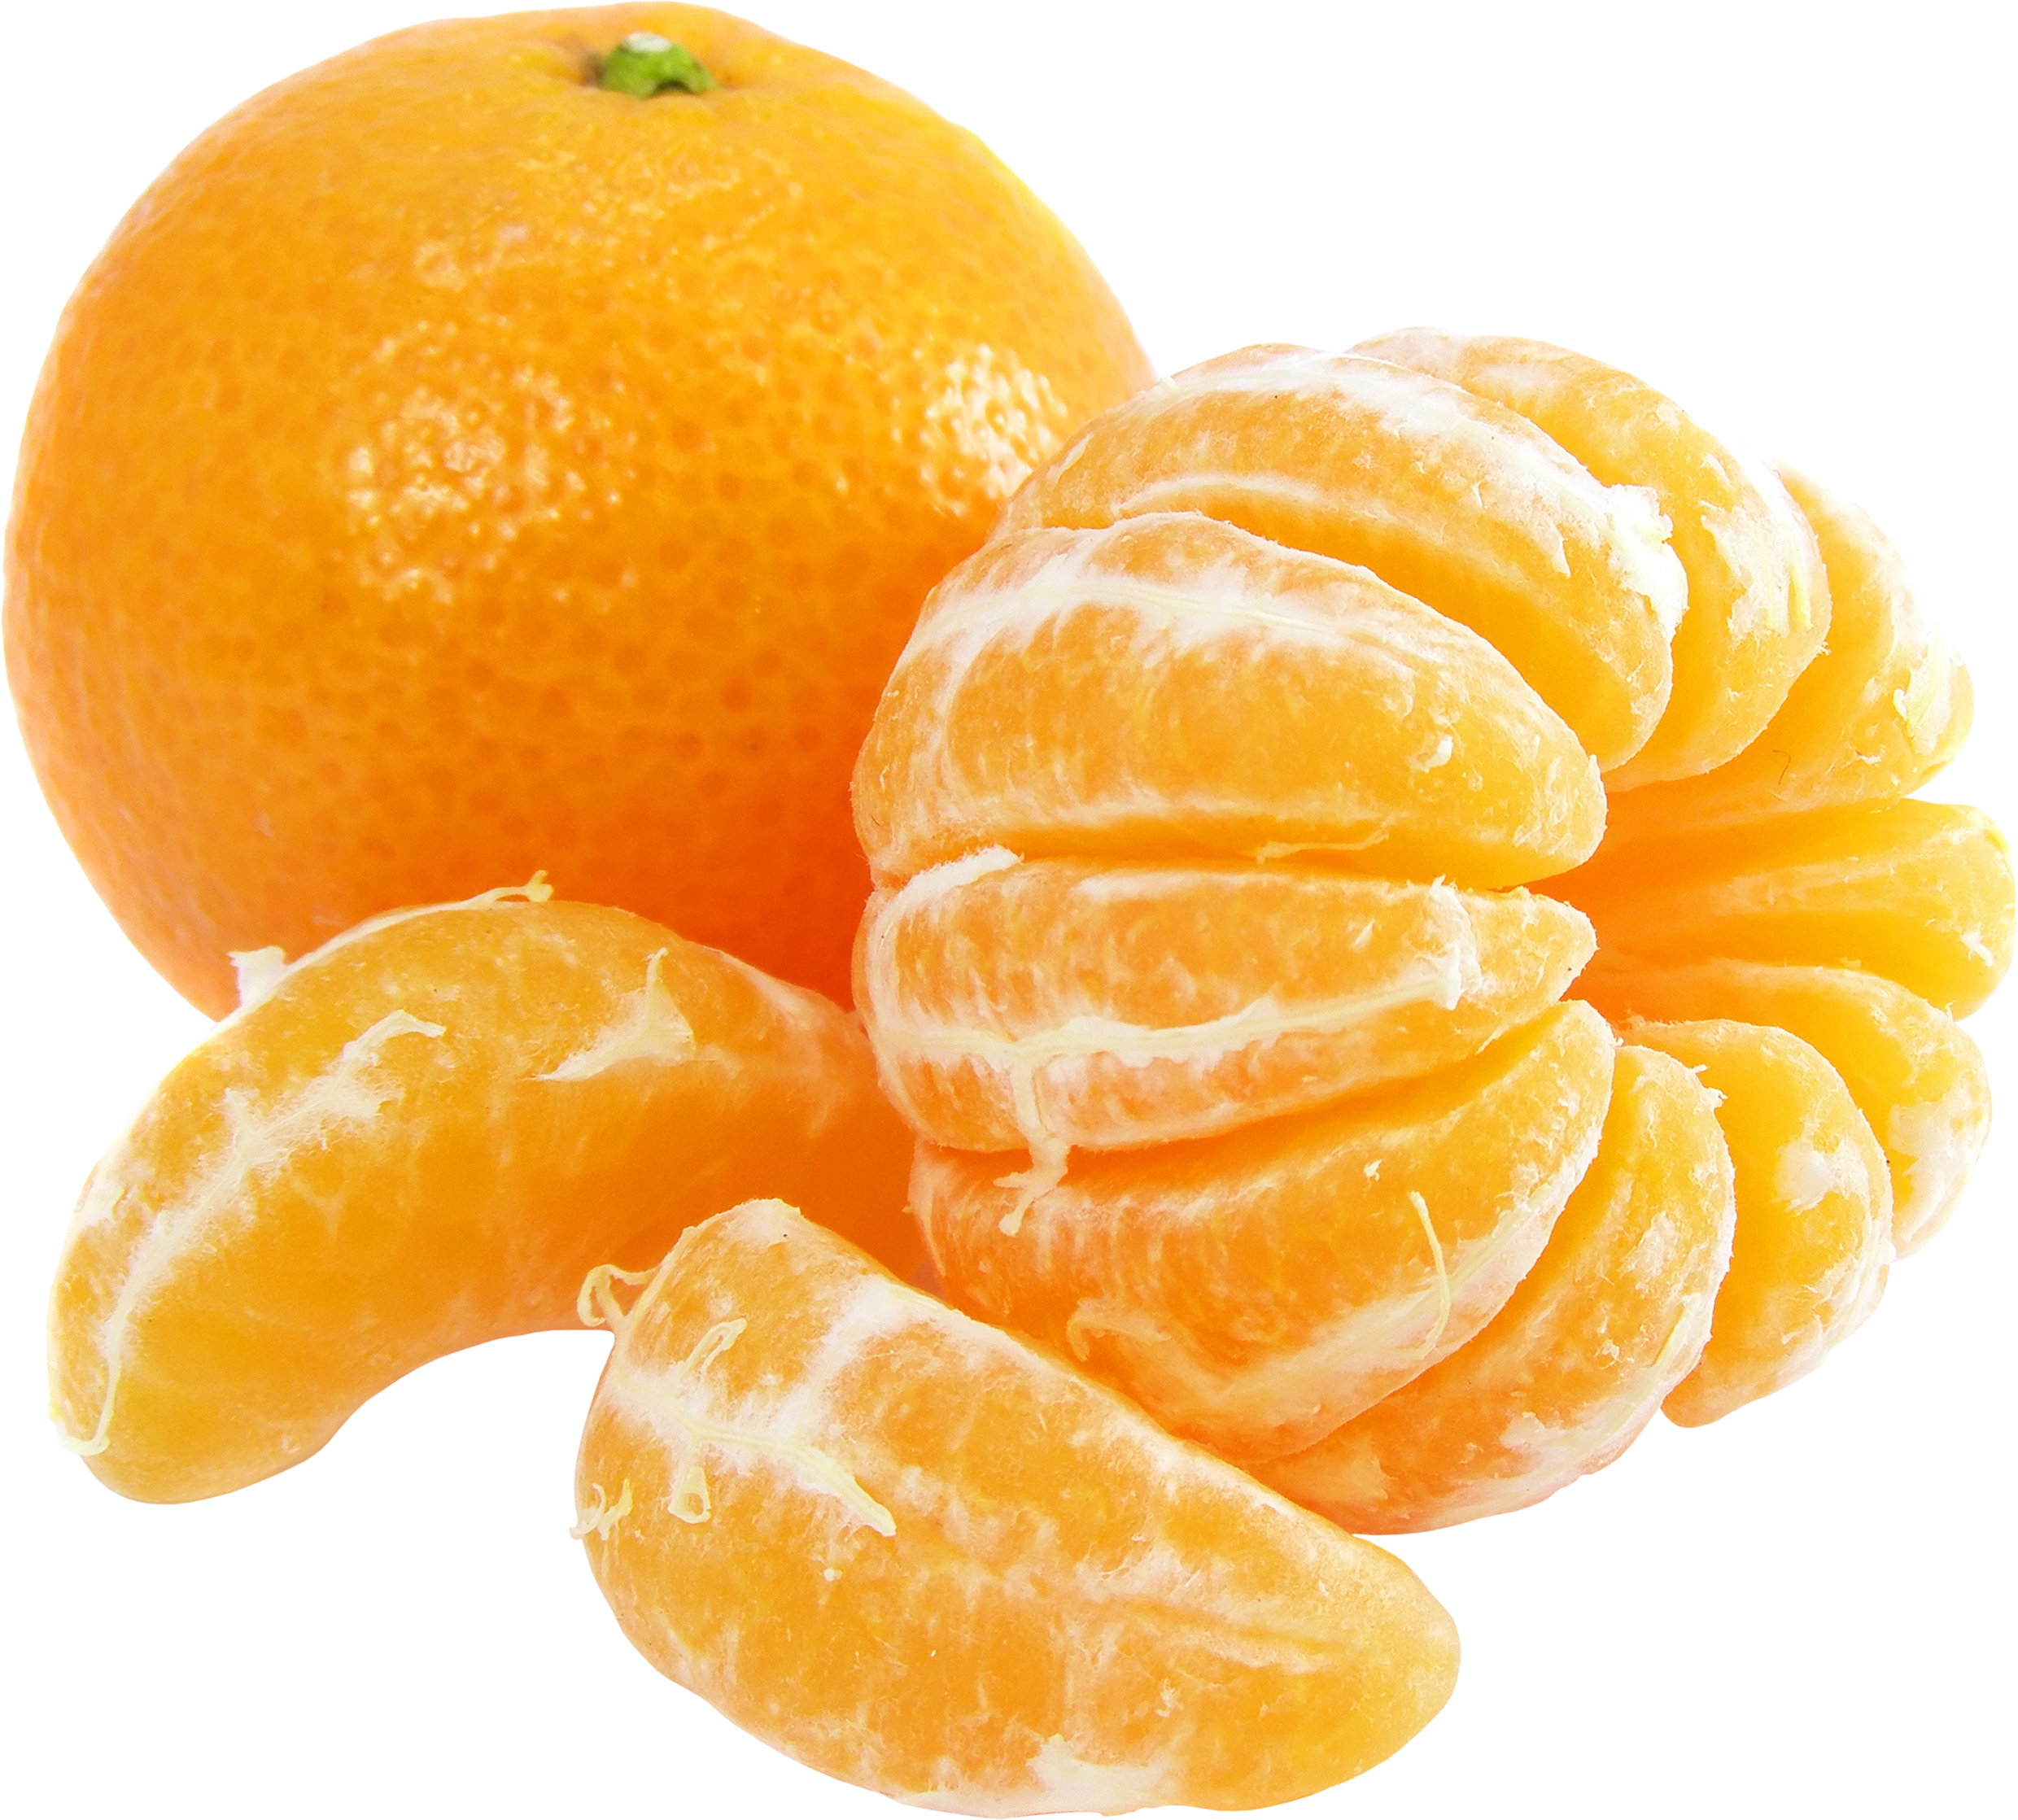 Oranges ready to eat PNG image